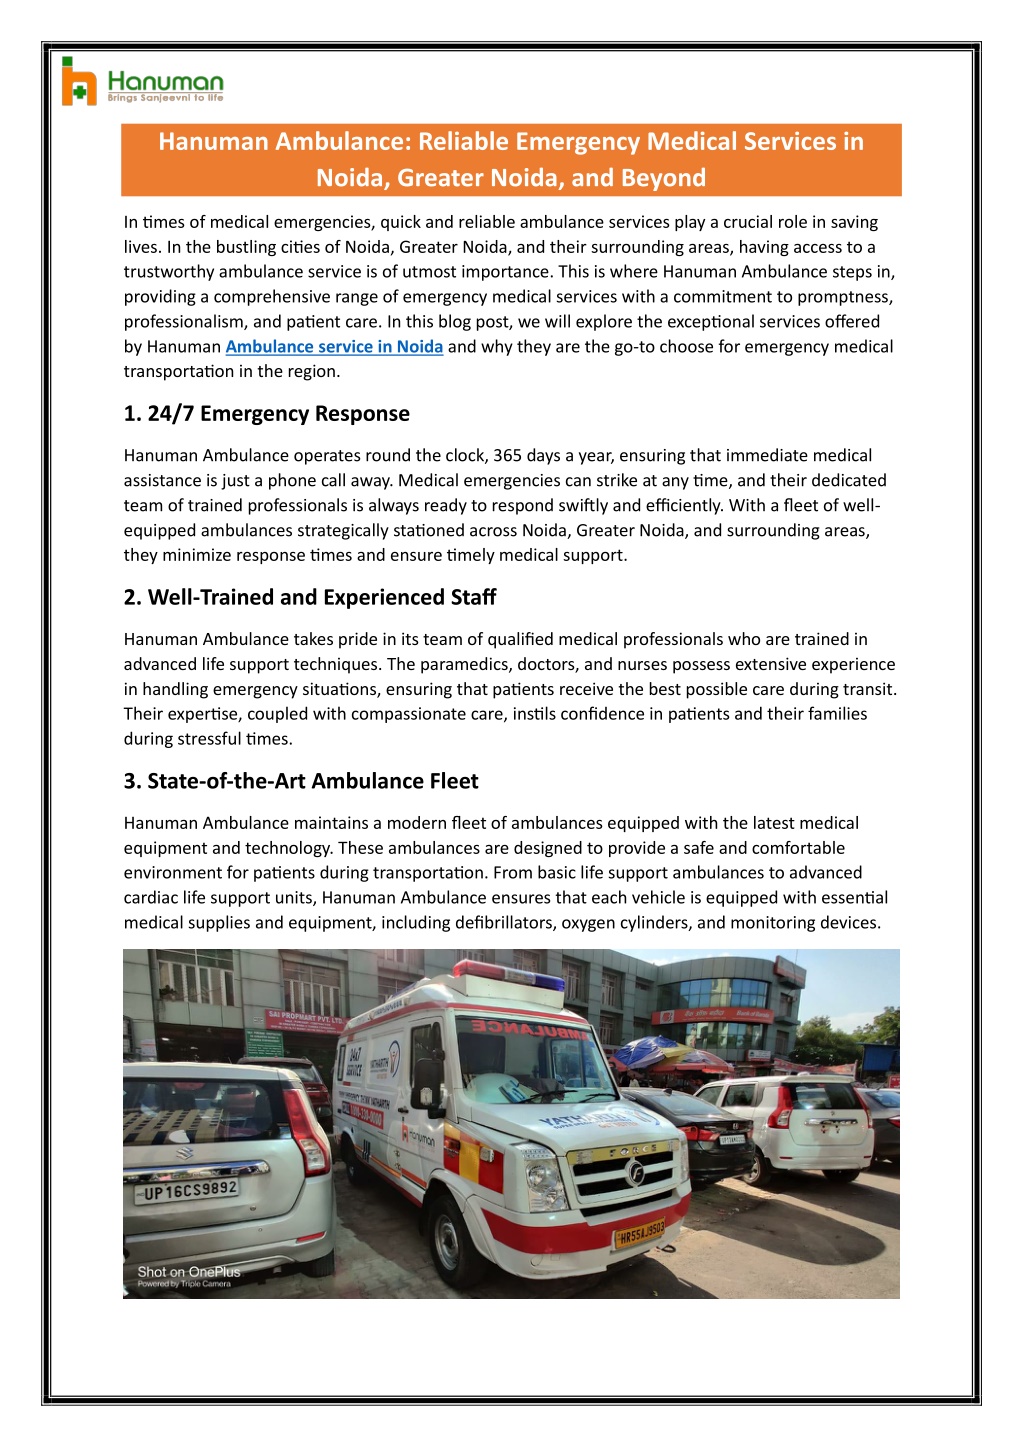 PPT - Hanuman Ambulance - Reliable Emergency Medical Services in